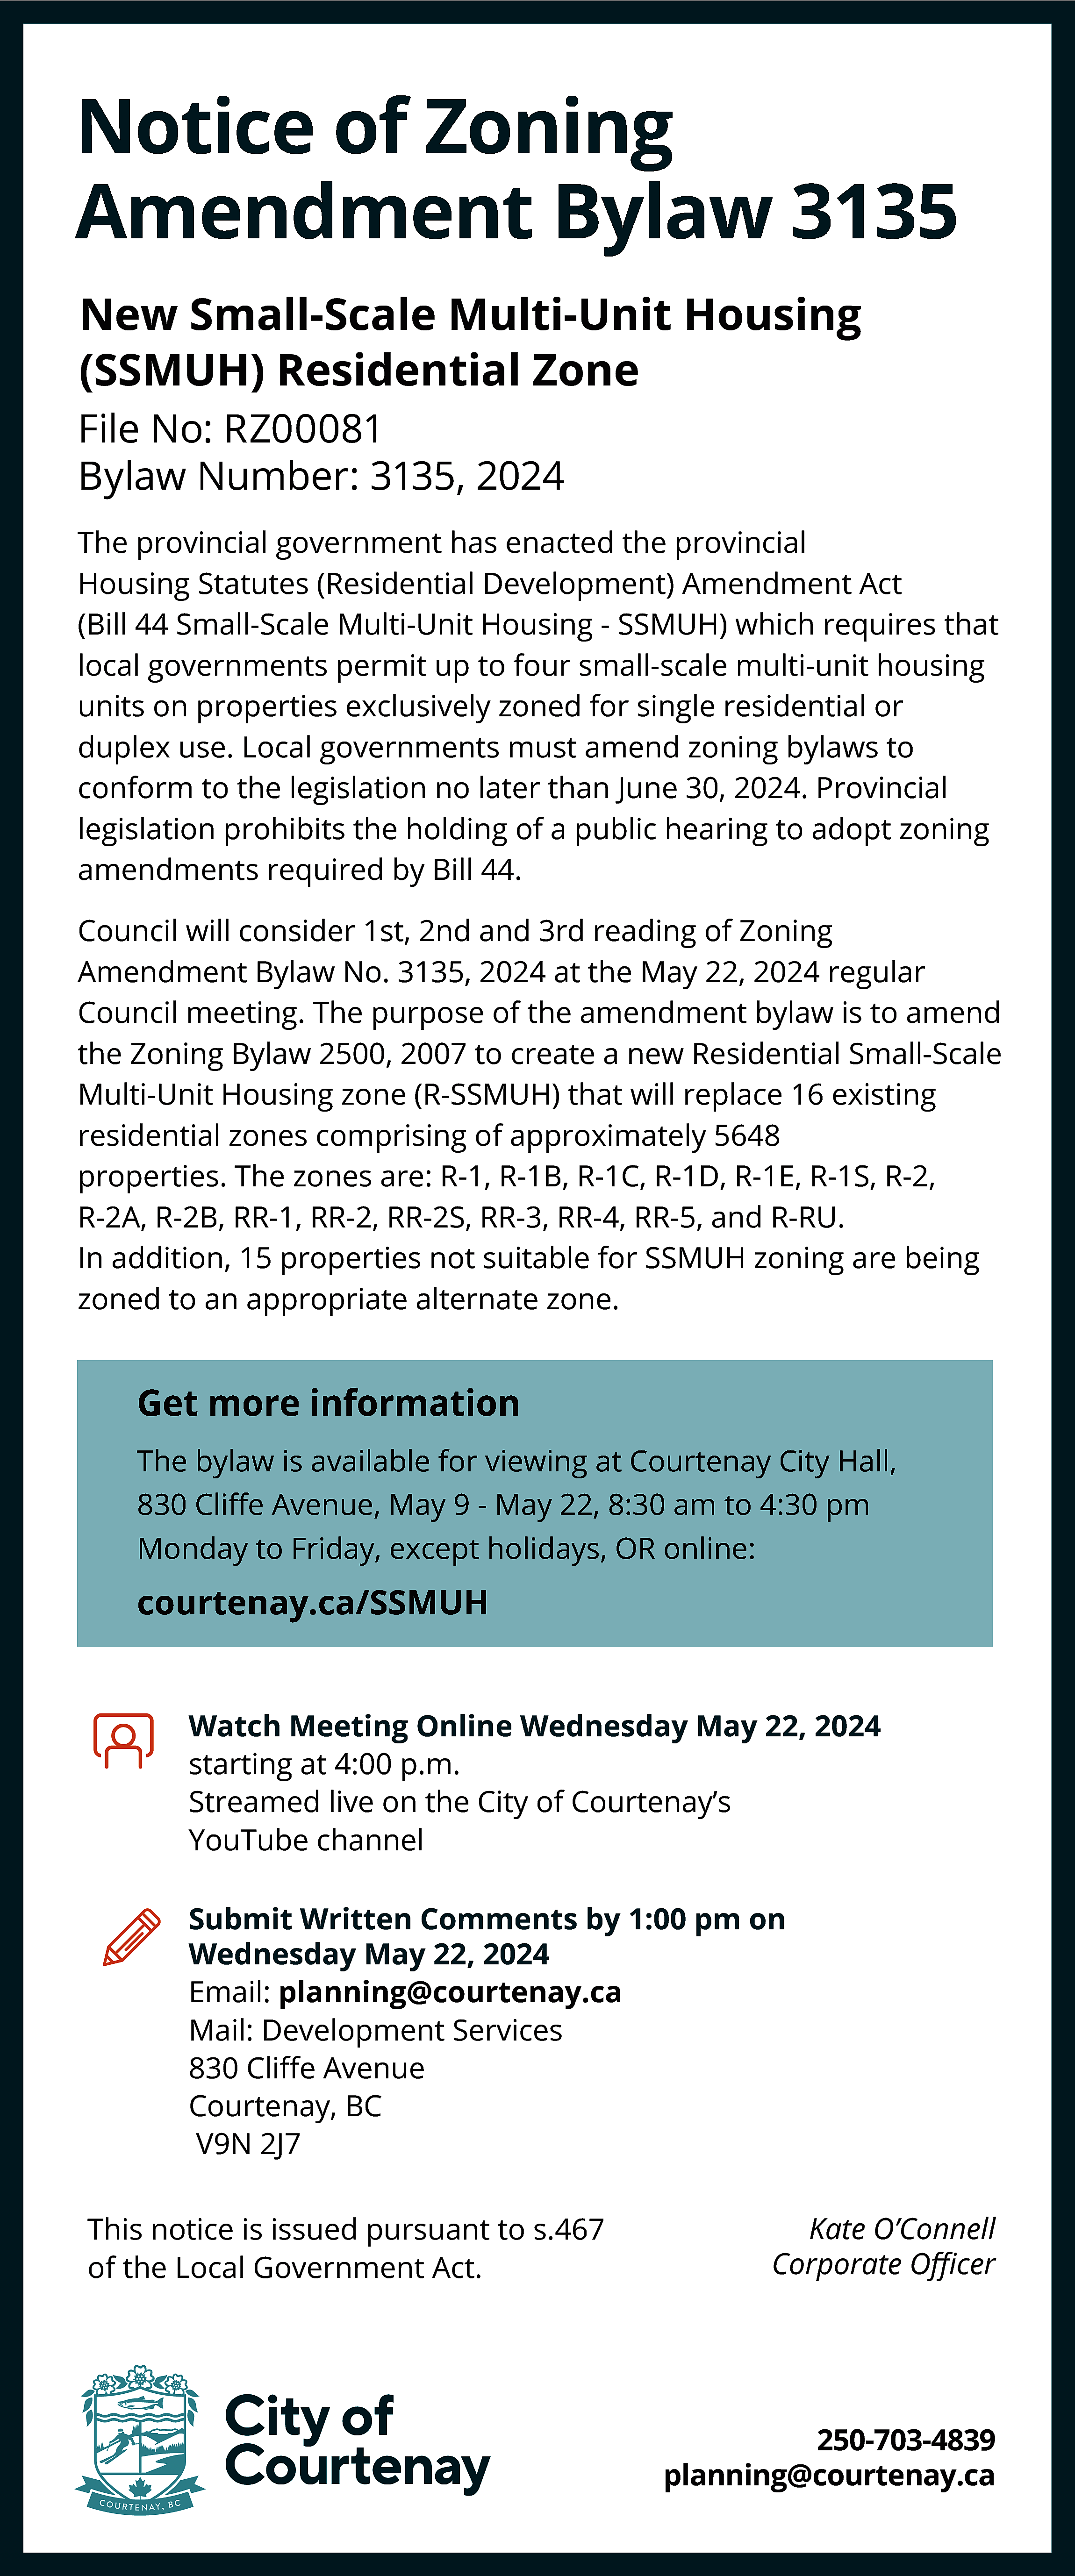 Notice of Zoning <br>Amendment Bylaw  Notice of Zoning  Amendment Bylaw 3135  New Small-Scale Multi-Unit Housing  (SSMUH) Residential Zone  File No: RZ00081  Bylaw Number: 3135, 2024  The provincial government has enacted the provincial  Housing Statutes (Residential Development) Amendment Act  (Bill 44 Small-Scale Multi-Unit Housing - SSMUH) which requires that  local governments permit up to four small-scale multi-unit housing  units on properties exclusively zoned for single residential or  duplex use. Local governments must amend zoning bylaws to  conform to the legislation no later than June 30, 2024. Provincial  legislation prohibits the holding of a public hearing to adopt zoning  amendments required by Bill 44.  Council will consider 1st, 2nd and 3rd reading of Zoning  Amendment Bylaw No. 3135, 2024 at the May 22, 2024 regular  Council meeting. The purpose of the amendment bylaw is to amend  the Zoning Bylaw 2500, 2007 to create a new Residential Small-Scale  Multi-Unit Housing zone (R-SSMUH) that will replace 16 existing  residential zones comprising of approximately 5648  properties. The zones are: R-1, R-1B, R-1C, R-1D, R-1E, R-1S, R-2,  R-2A, R-2B, RR-1, RR-2, RR-2S, RR-3, RR-4, RR-5, and R-RU.  In addition, 15 properties not suitable for SSMUH zoning are being  zoned to an appropriate alternate zone.    Get more information  The bylaw is available for viewing at Courtenay City Hall,  830 Cliﬀe Avenue, May 9 - May 22, 8:30 am to 4:30 pm  Monday to Friday, except holidays, OR online:    courtenay.ca/SSMUH  Watch Meeting Online Wednesday May 22, 2024  starting at 4:00 p.m.  Streamed live on the City of Courtenay’s  YouTube channel  Submit Written Comments by 1:00 pm on  Wednesday May 22, 2024  Email: planning@courtenay.ca  Mail: Development Services  830 Cliﬀe Avenue  Courtenay, BC  V9N 2J7  This notice is issued pursuant to s.467  of the Local Government Act.    Kate O’Connell  Corporate Oﬃcer    250-703-4839  planning@courtenay.ca    